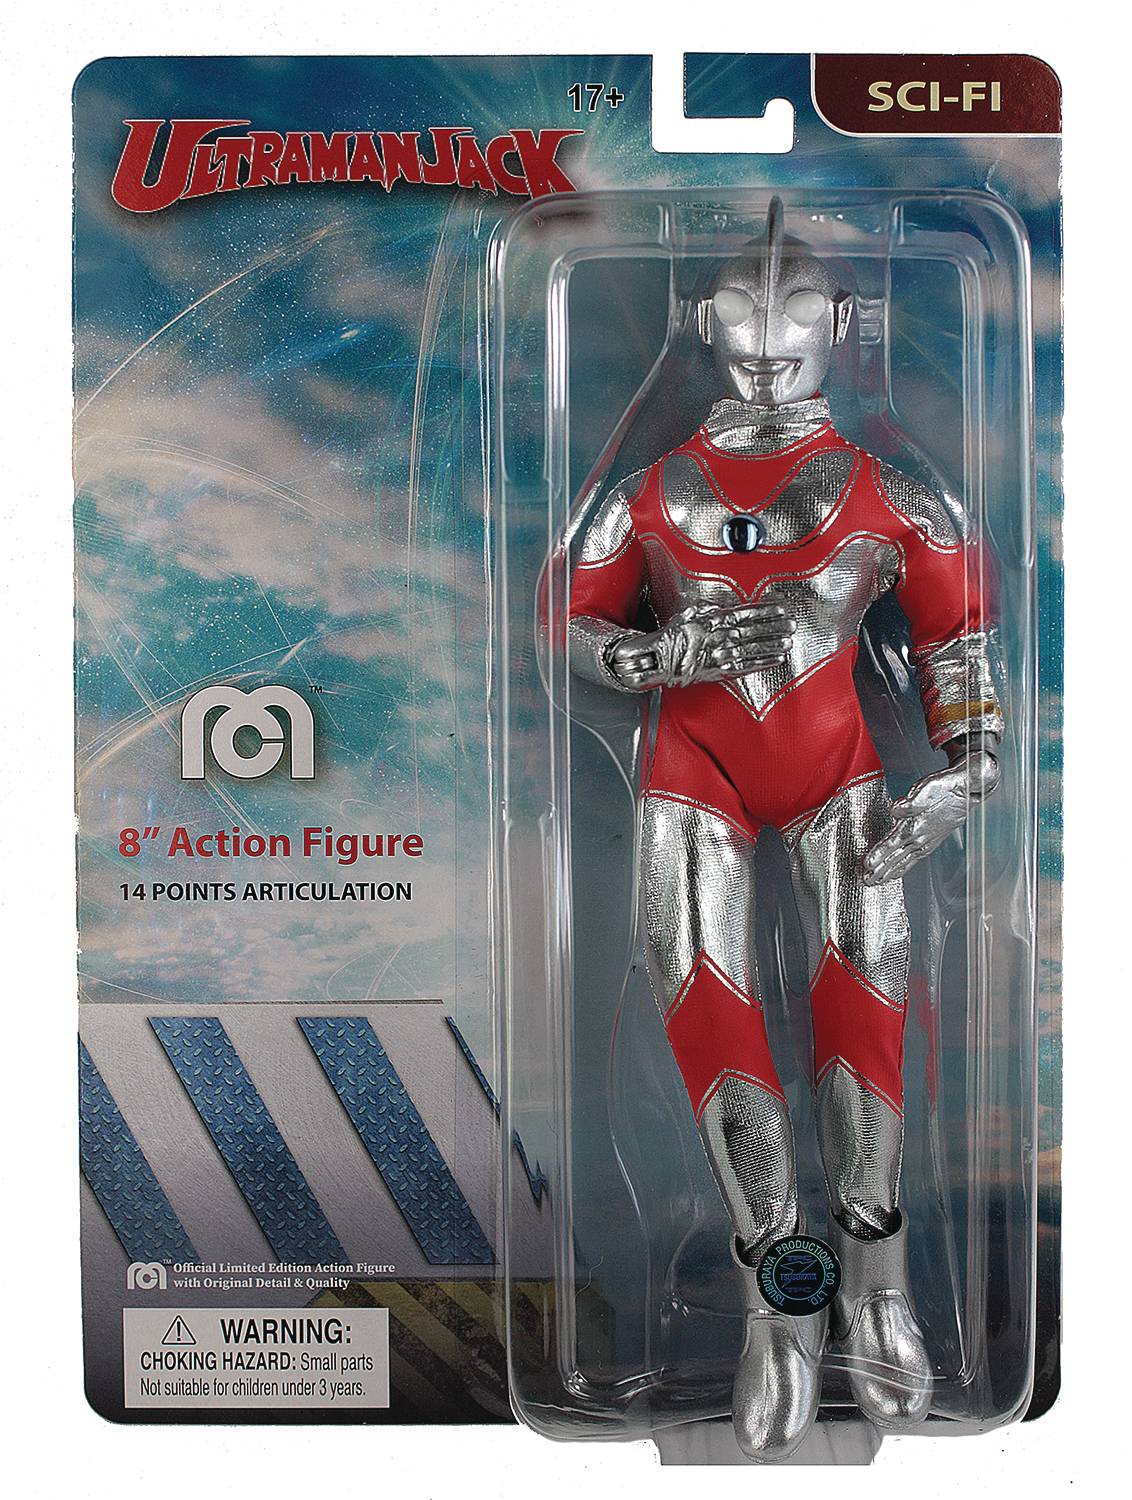 The One Stop Shop Comics & Games Mego Sci-Fi Ultraman Jack 8in Fig MEGO CORPORATION